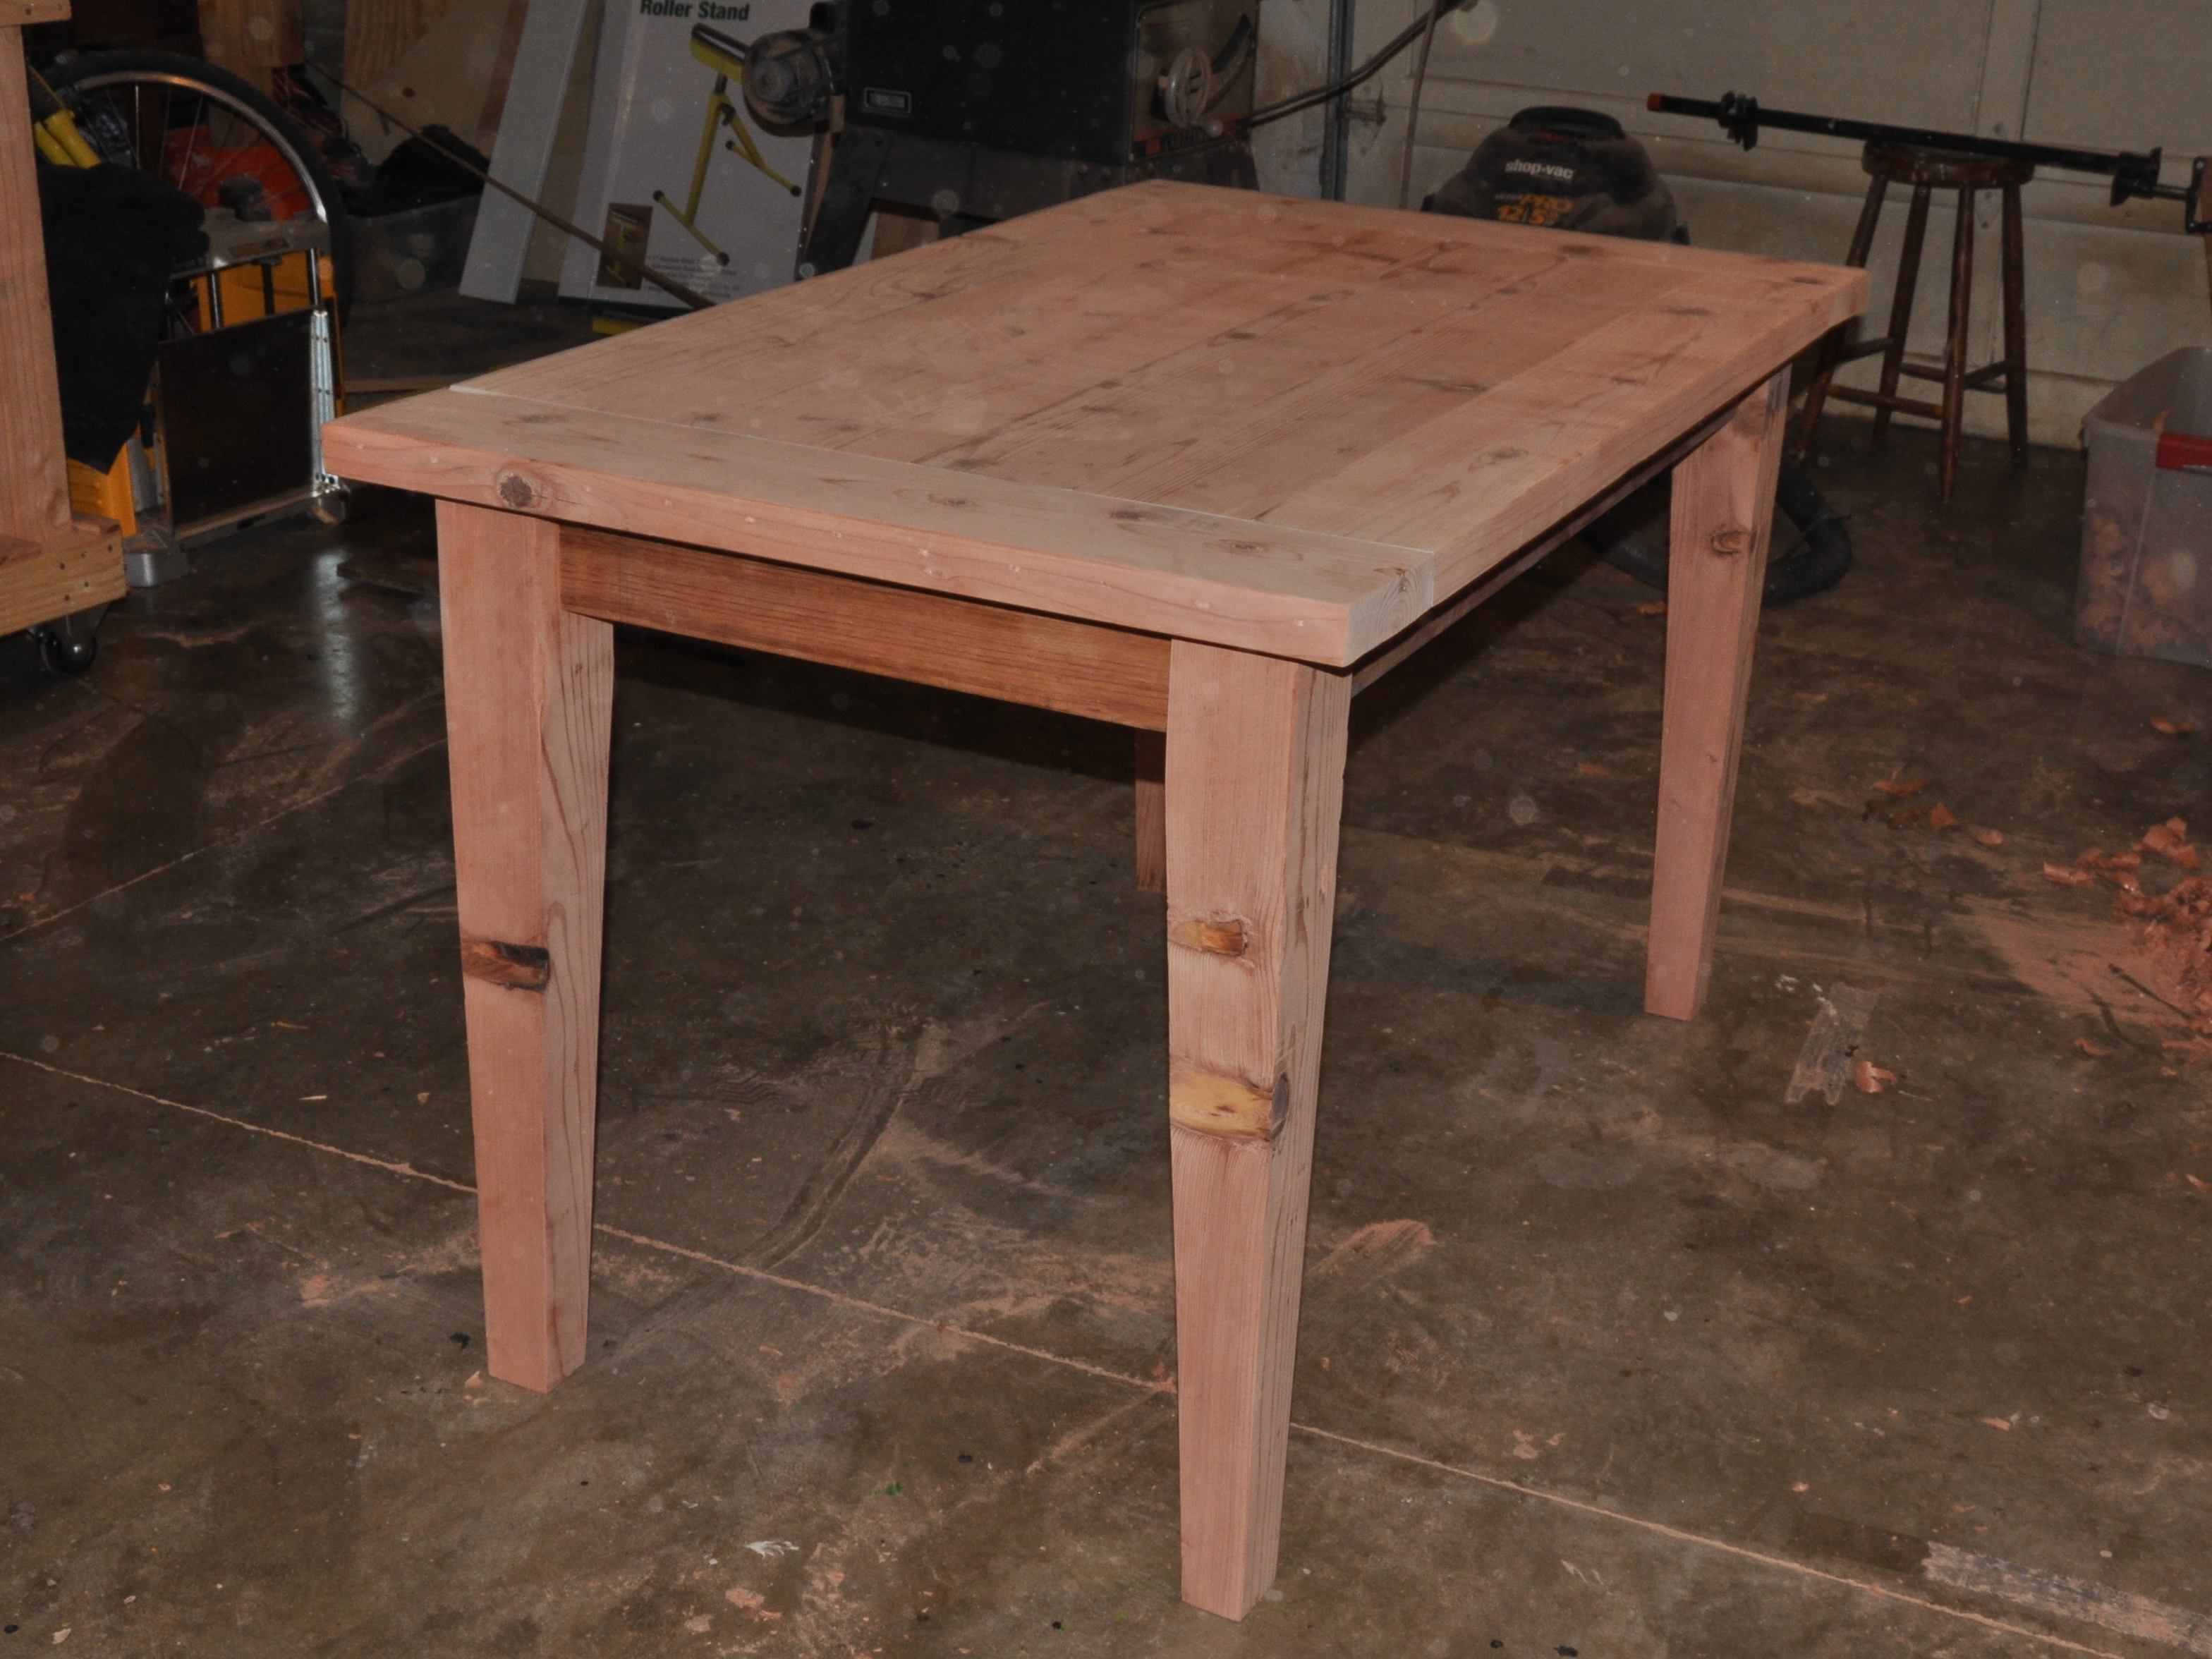 Make a Wooden Table that is Easily Disassembled Make 